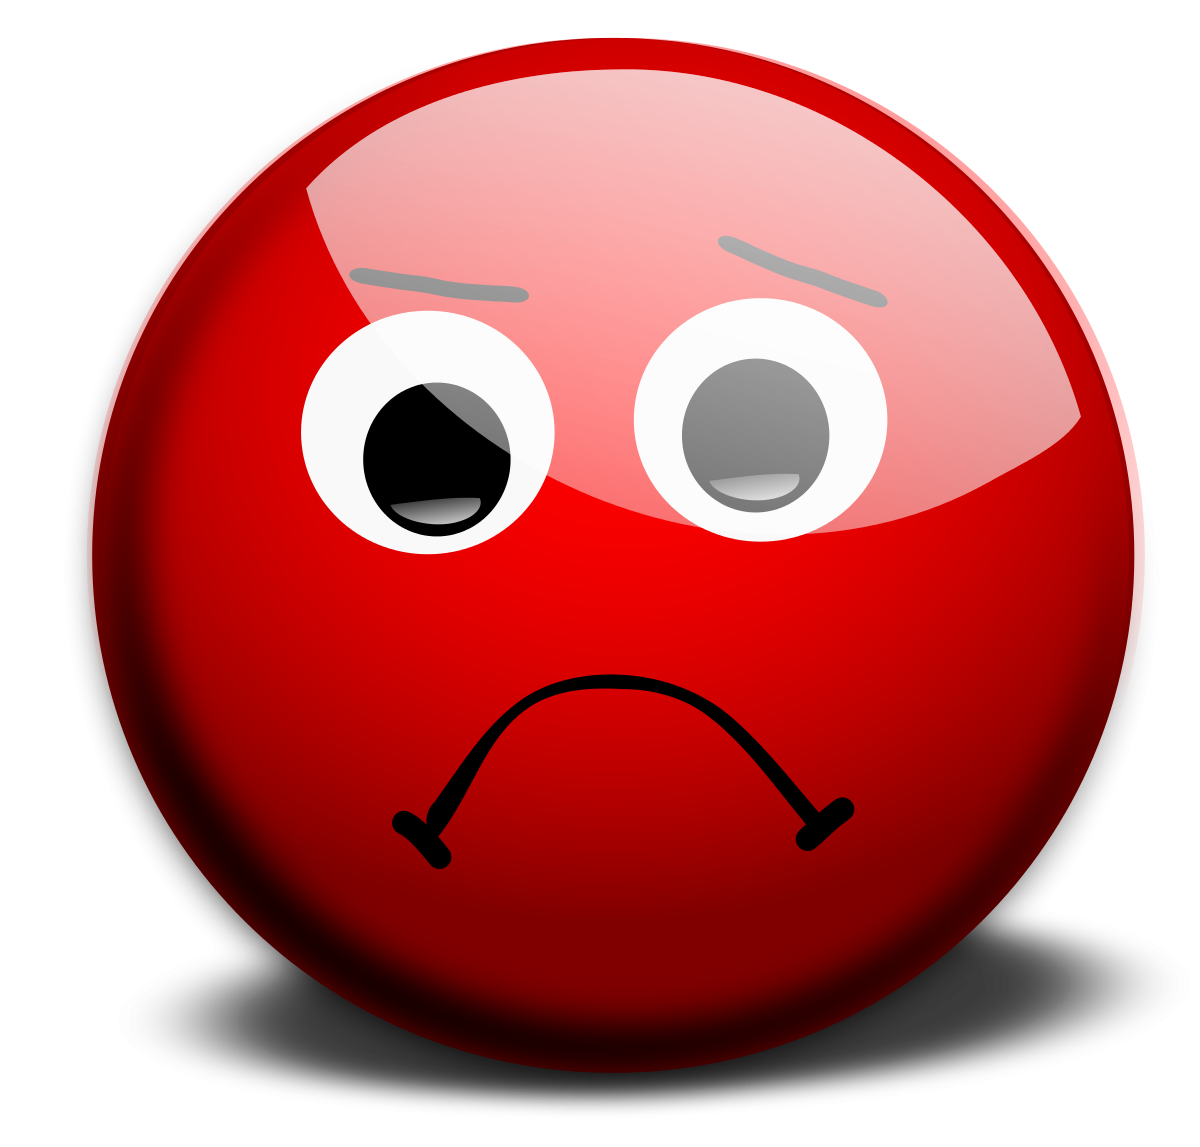 Sad Face Smiley Face Images Image Clipart